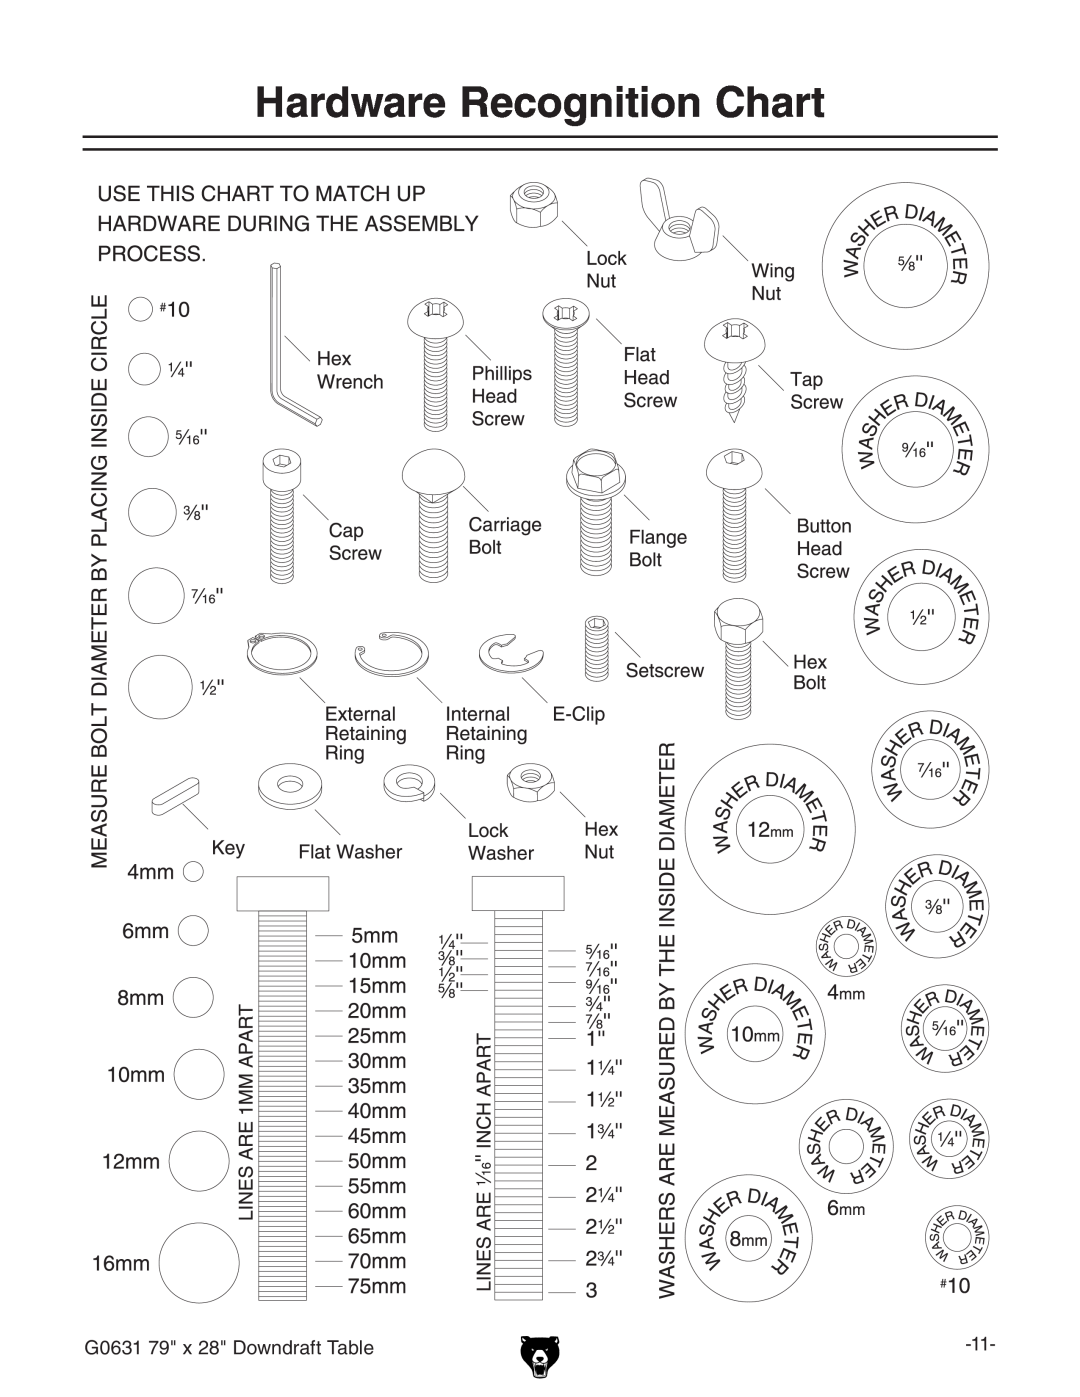 Grizzly owner manual Hardware Recognition Chart, G0631 79 x 28 Downdraft Table 